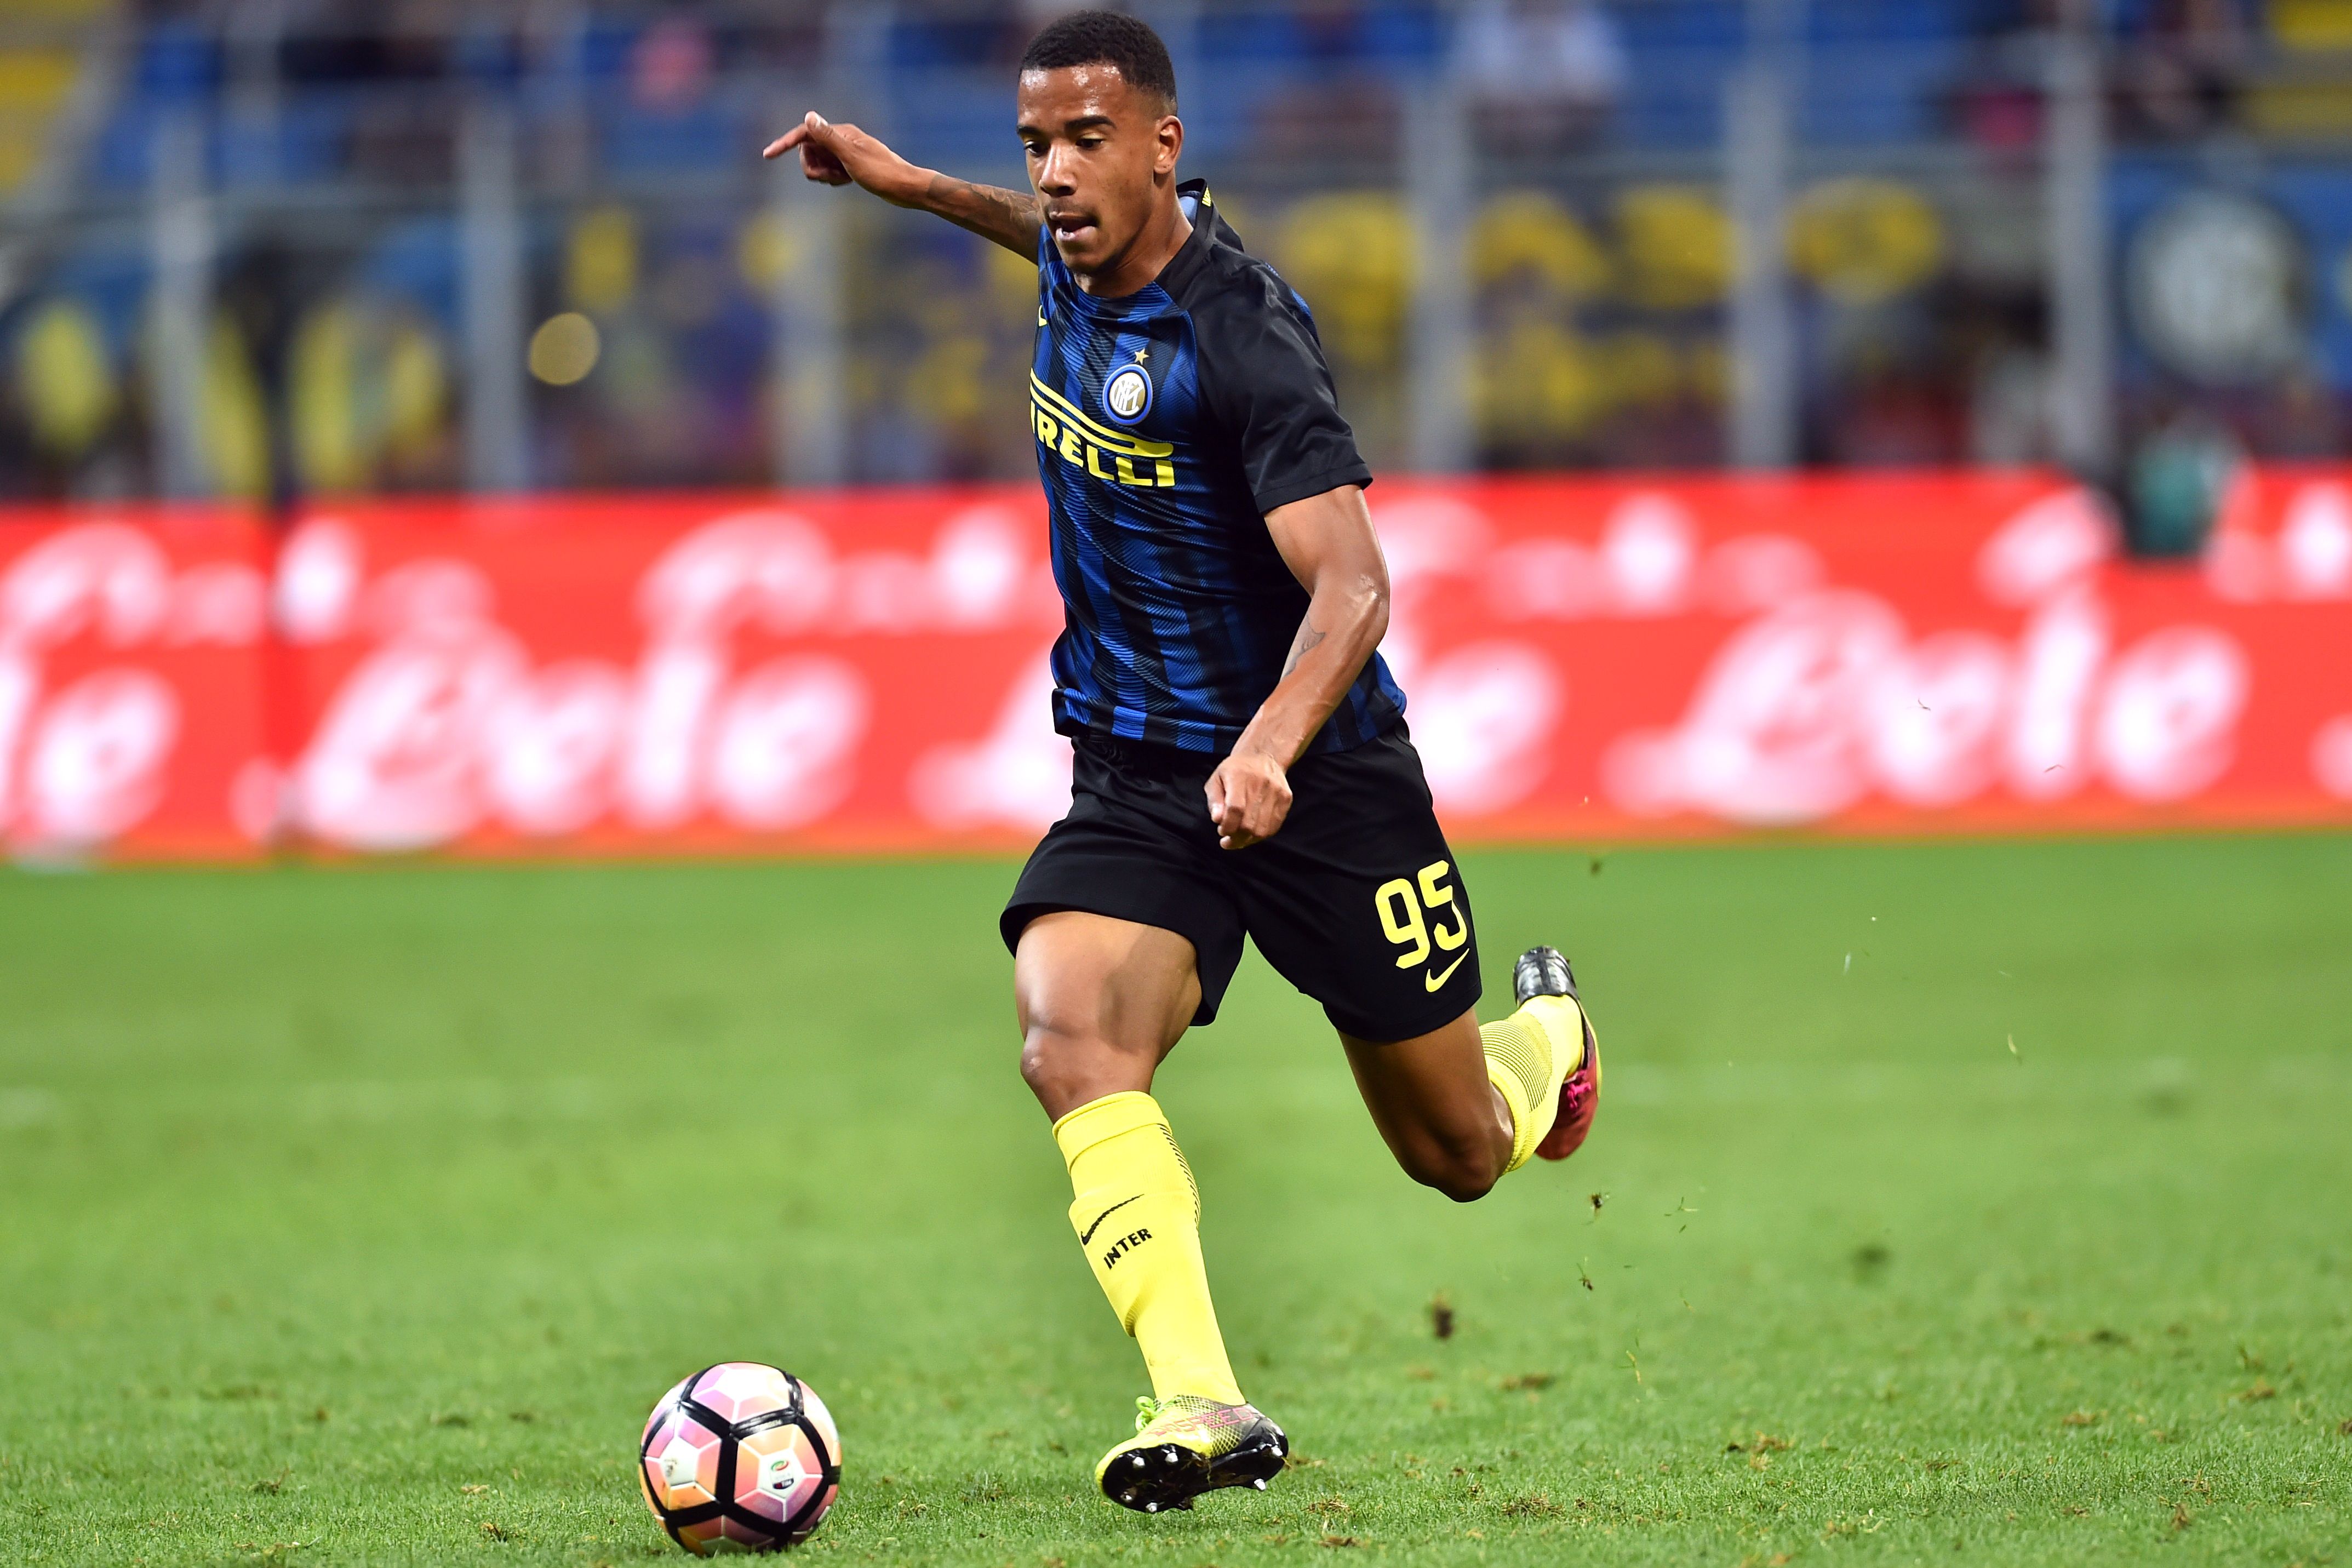 FCIN – Inter have €15m Miangue buy back option